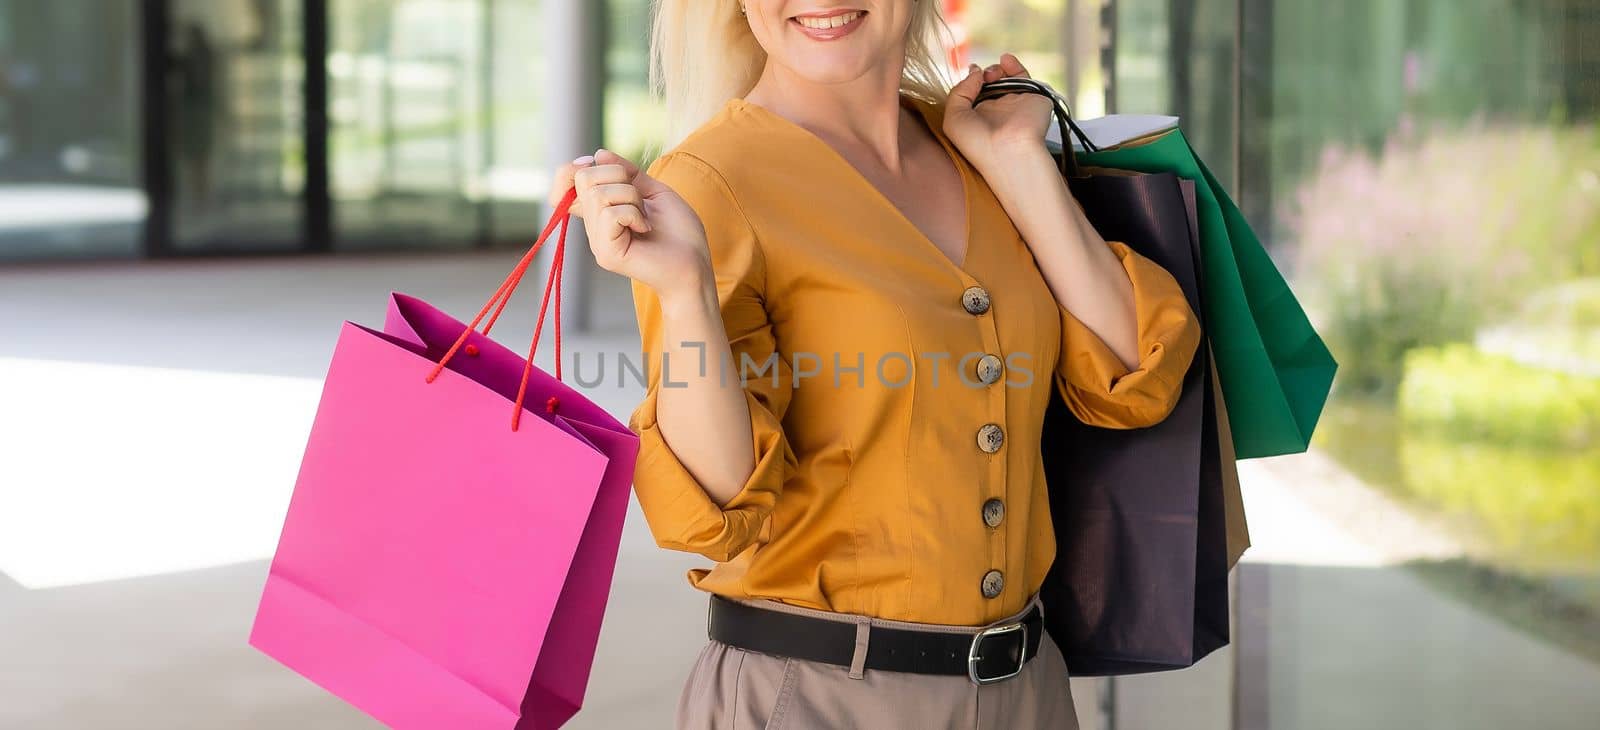 Happy woman holding shopping bags and smiling at the mall by Andelov13